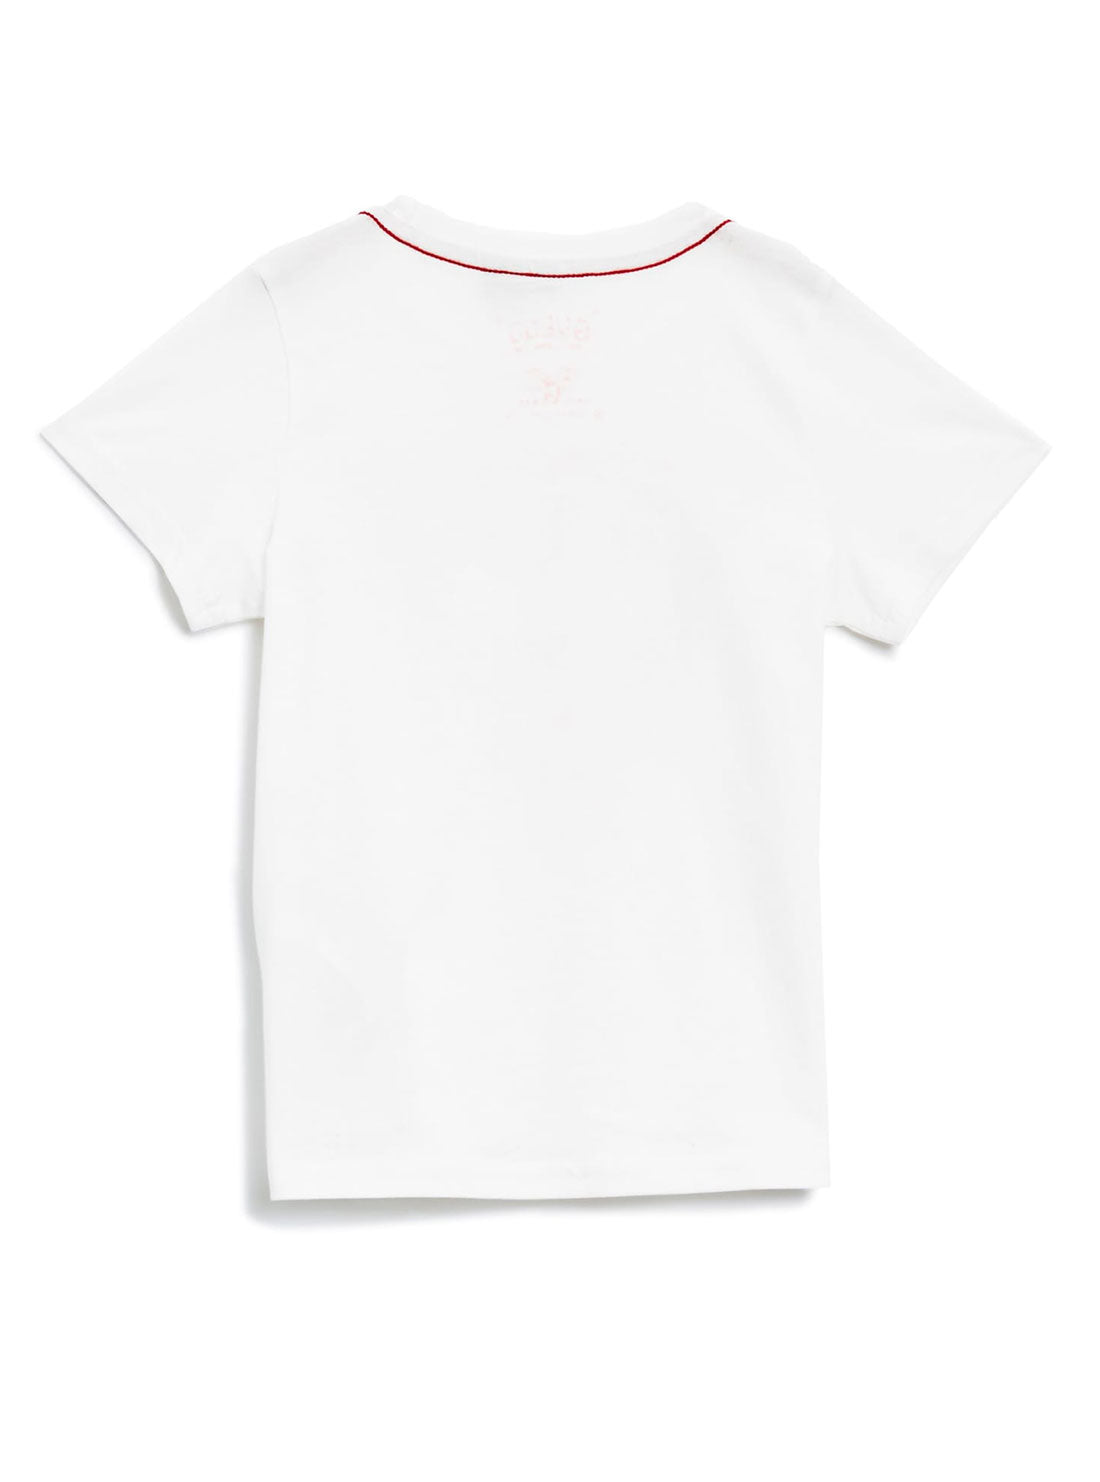 GUESS Short Sleeve Triangle Logo White Little Boy Tee Back View